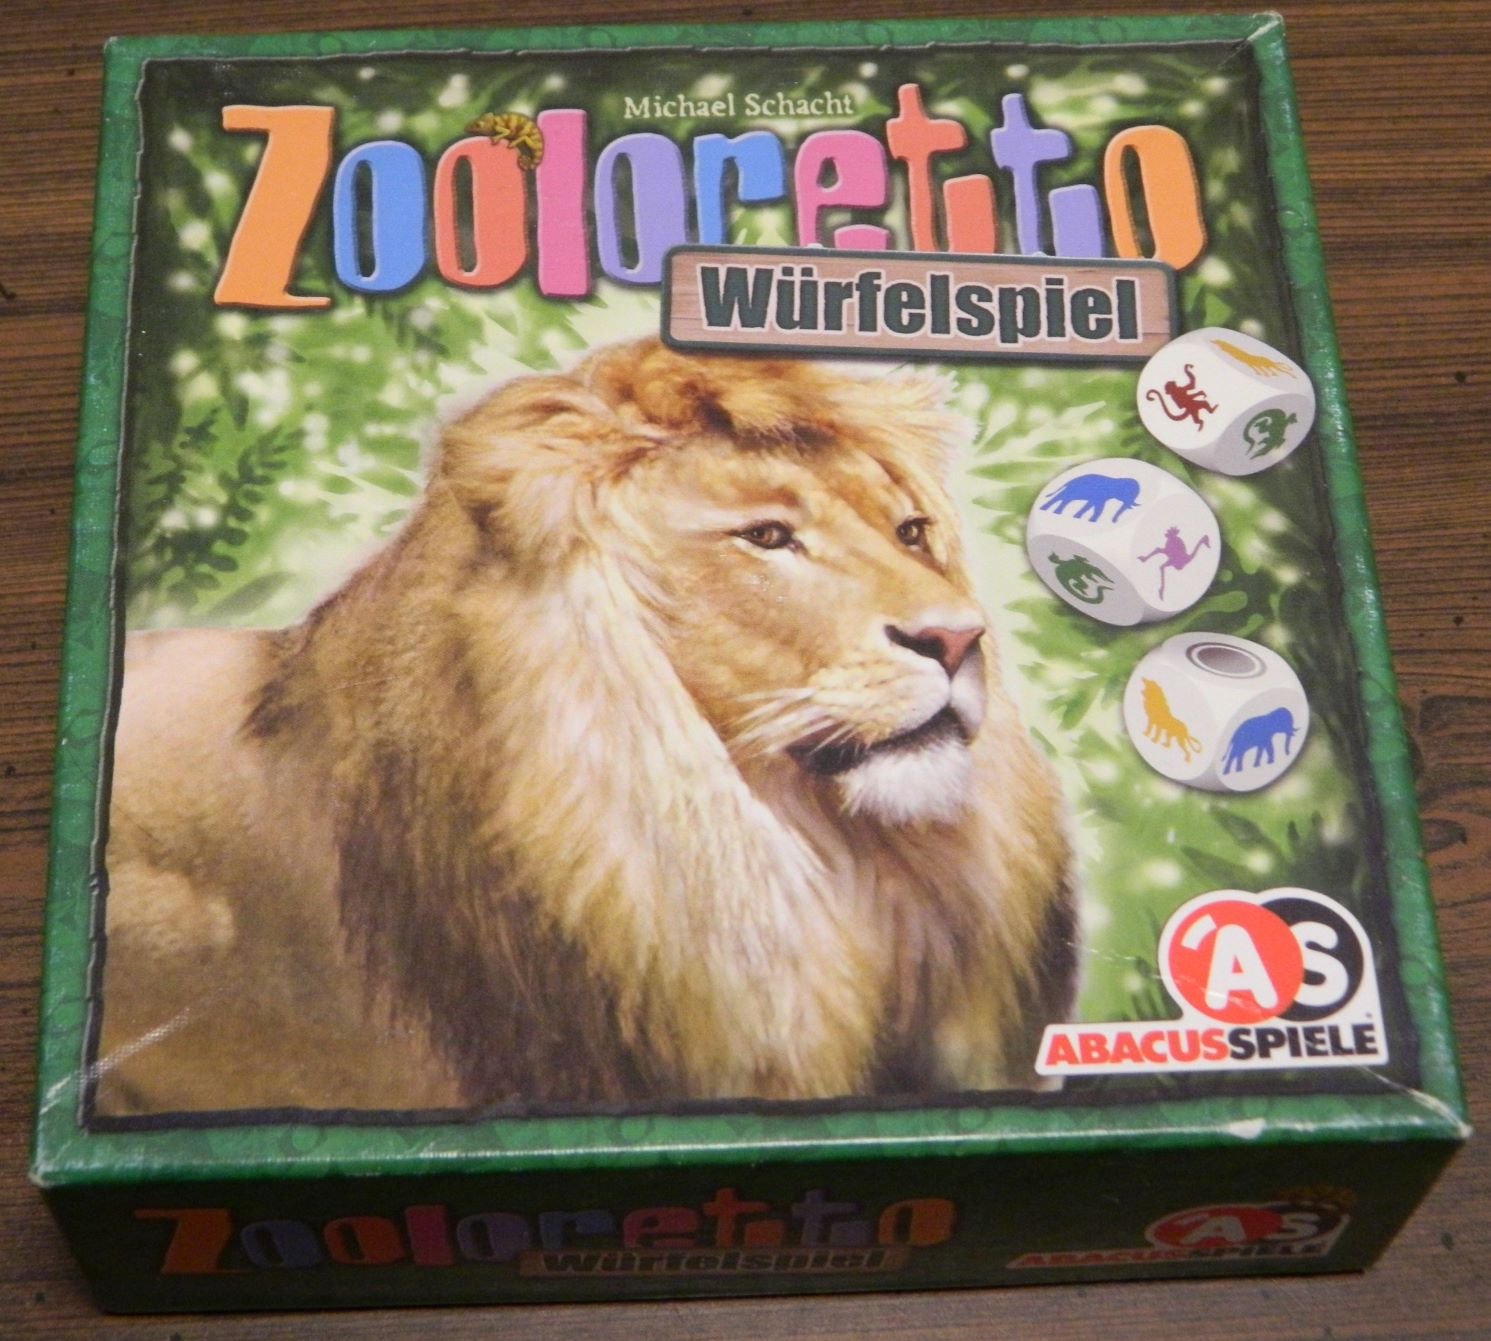 Zooloretto: The Dice Game Review and Rules